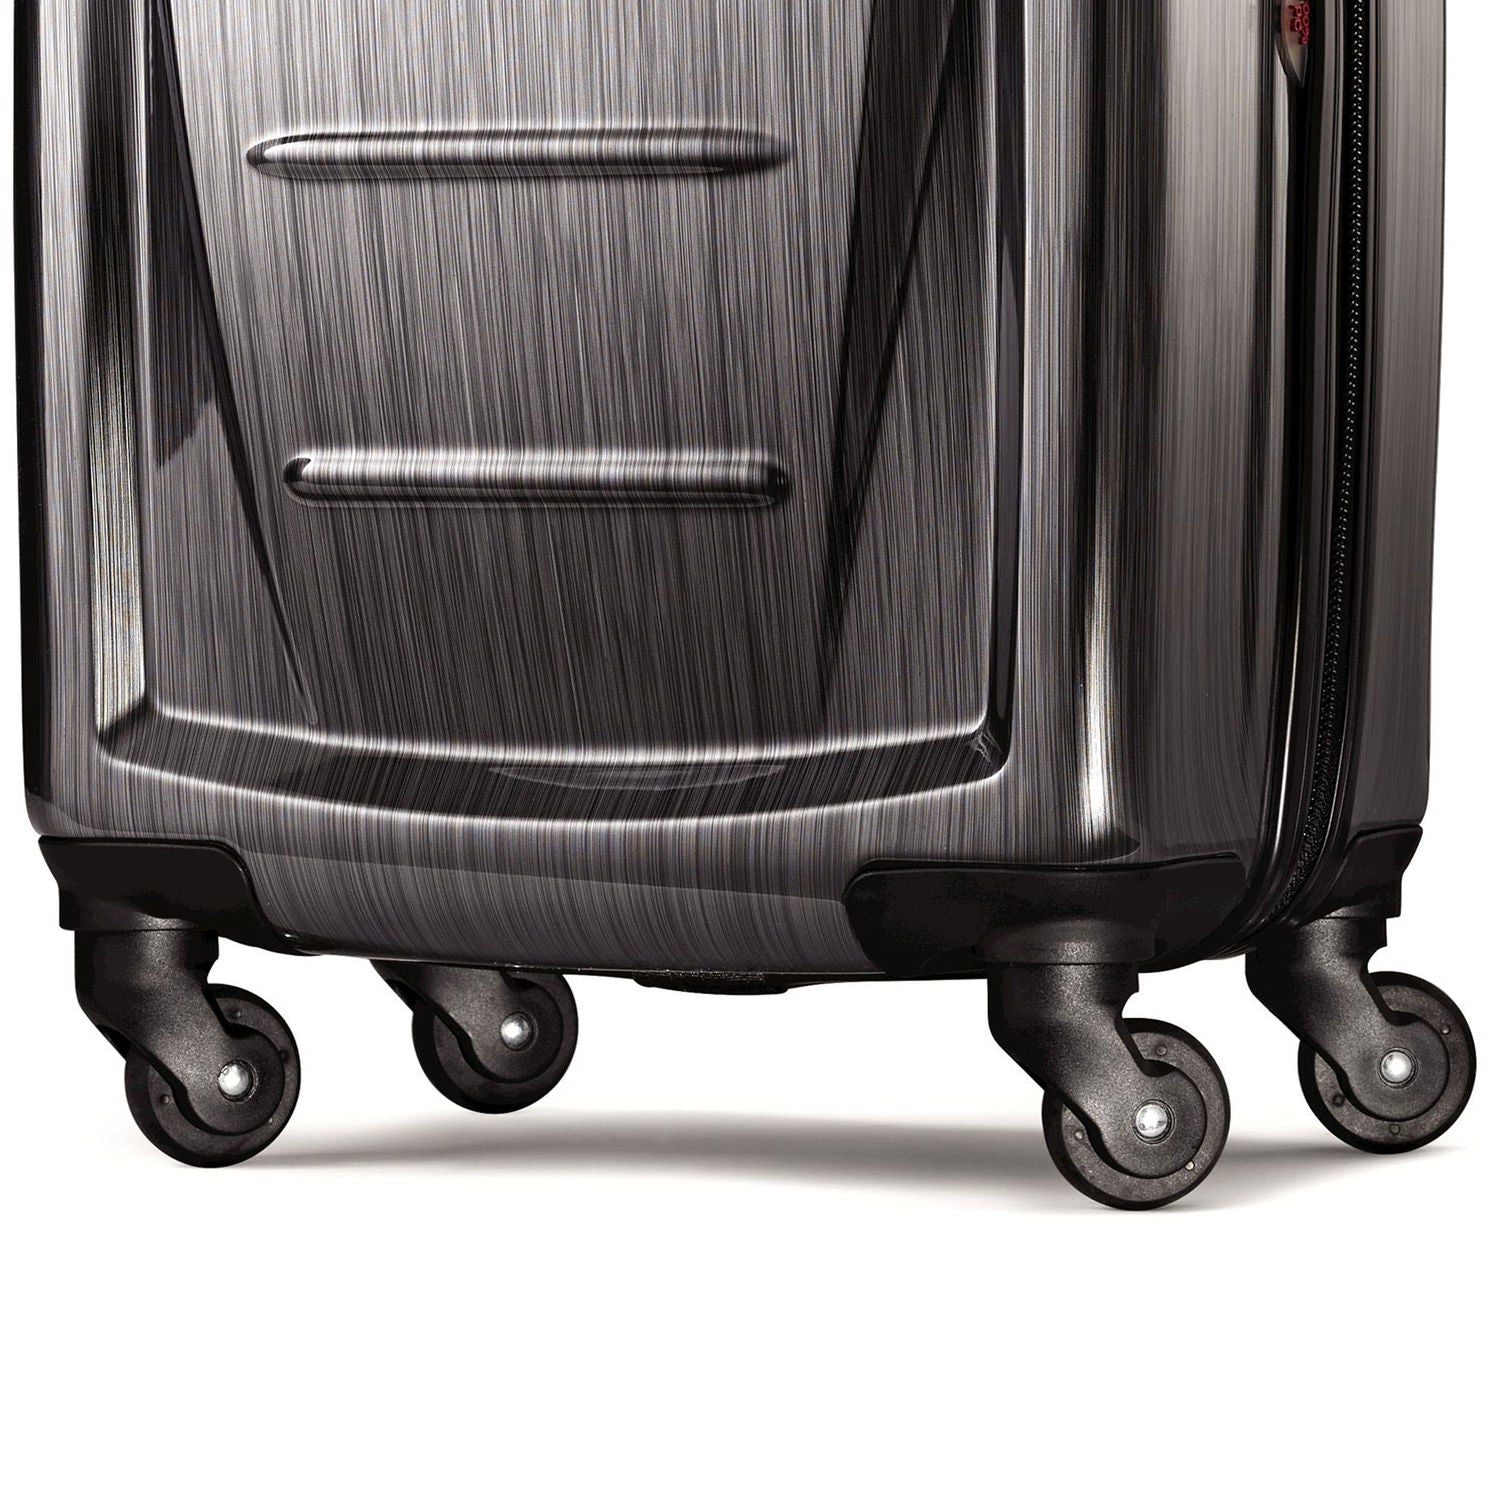 Samsonite Winfield 2 Fashion Spinner 20 Carry On